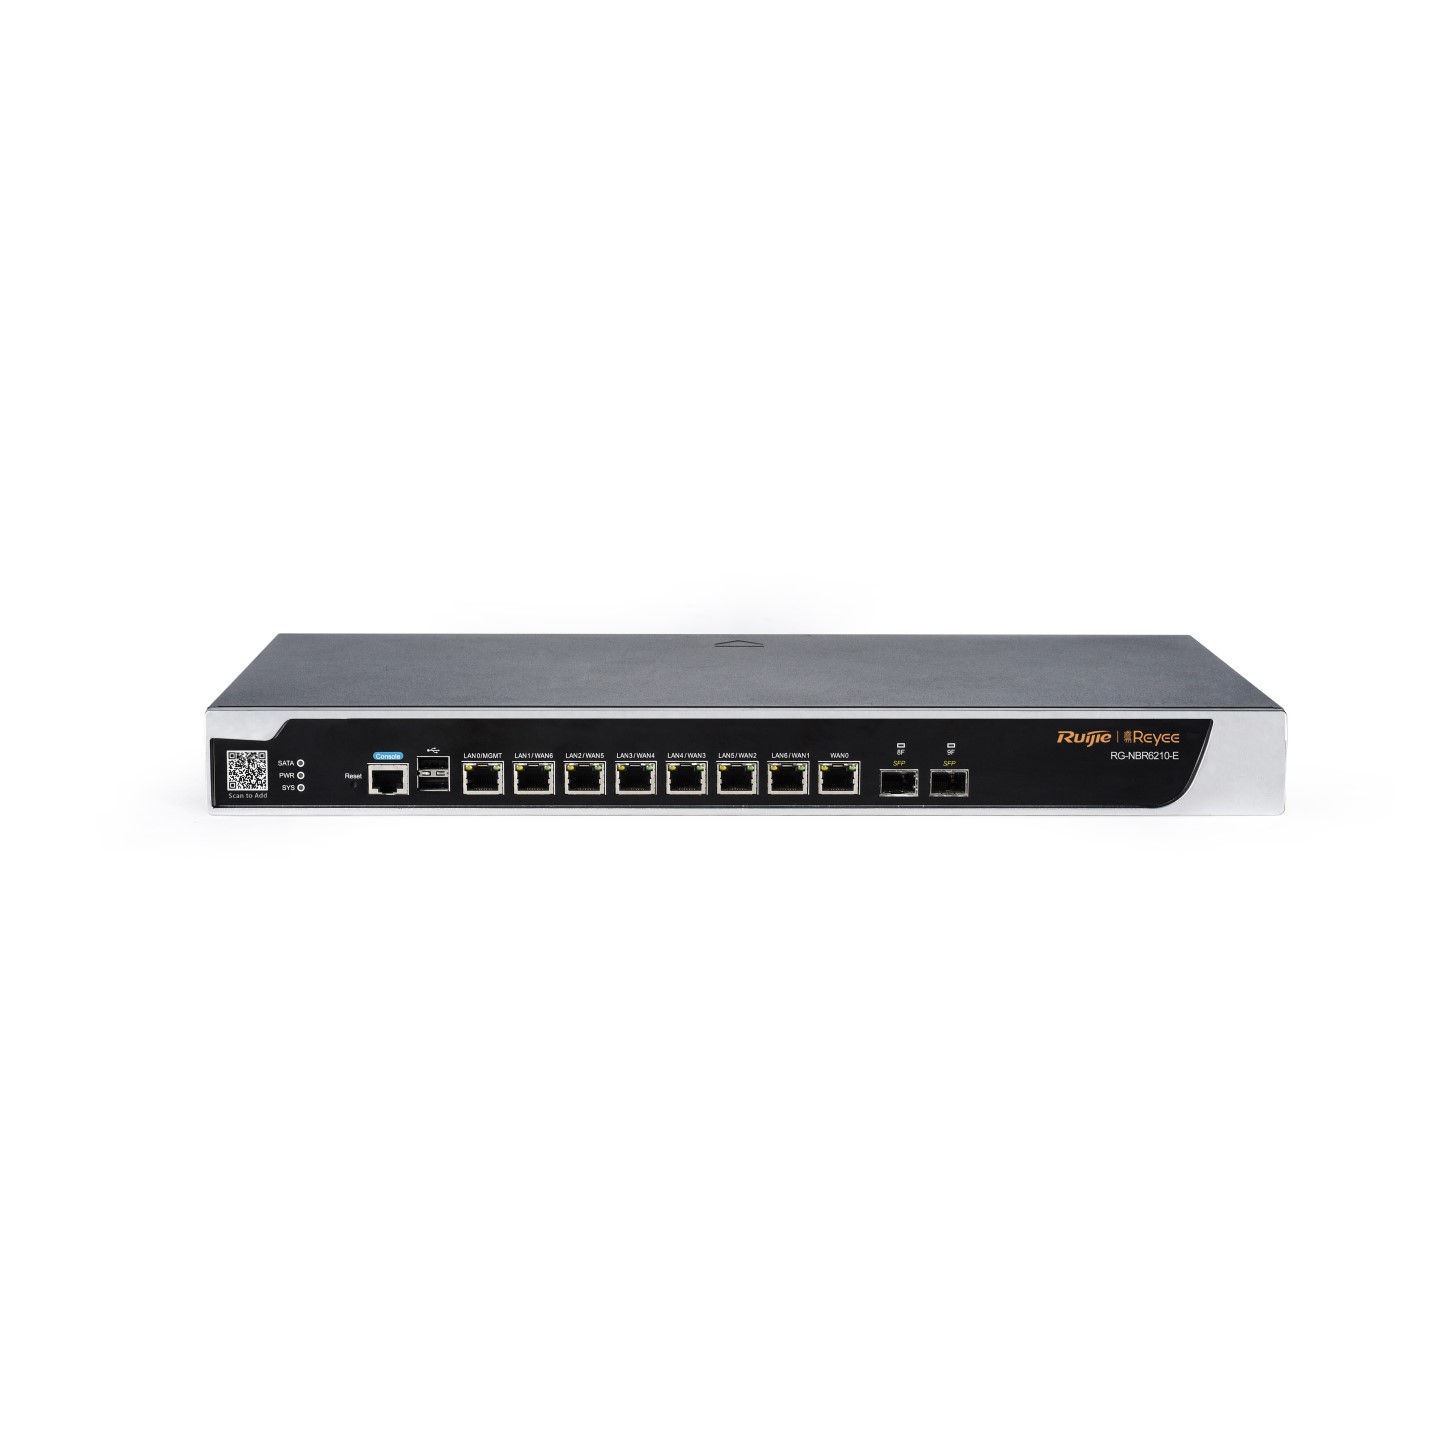 RG-NBR6210-E Reyee High-performance Cloud Managed Security Router